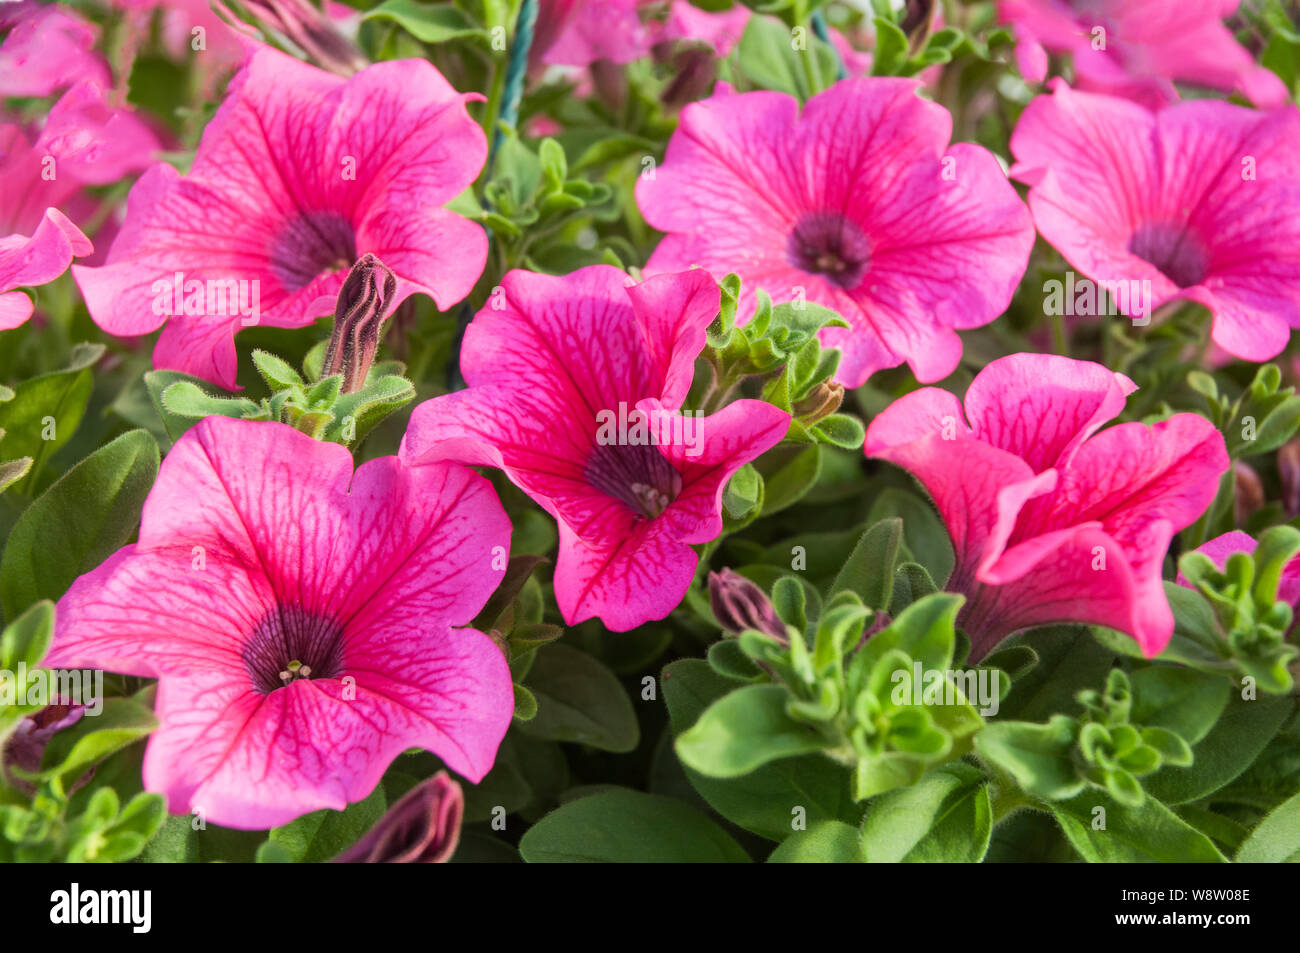 Grandiflora petunia or Petunia Surfinia Hot Red vigorous annual trailing flower that is used in hanging baskets window boxes tubs and borders etc Stock Photo